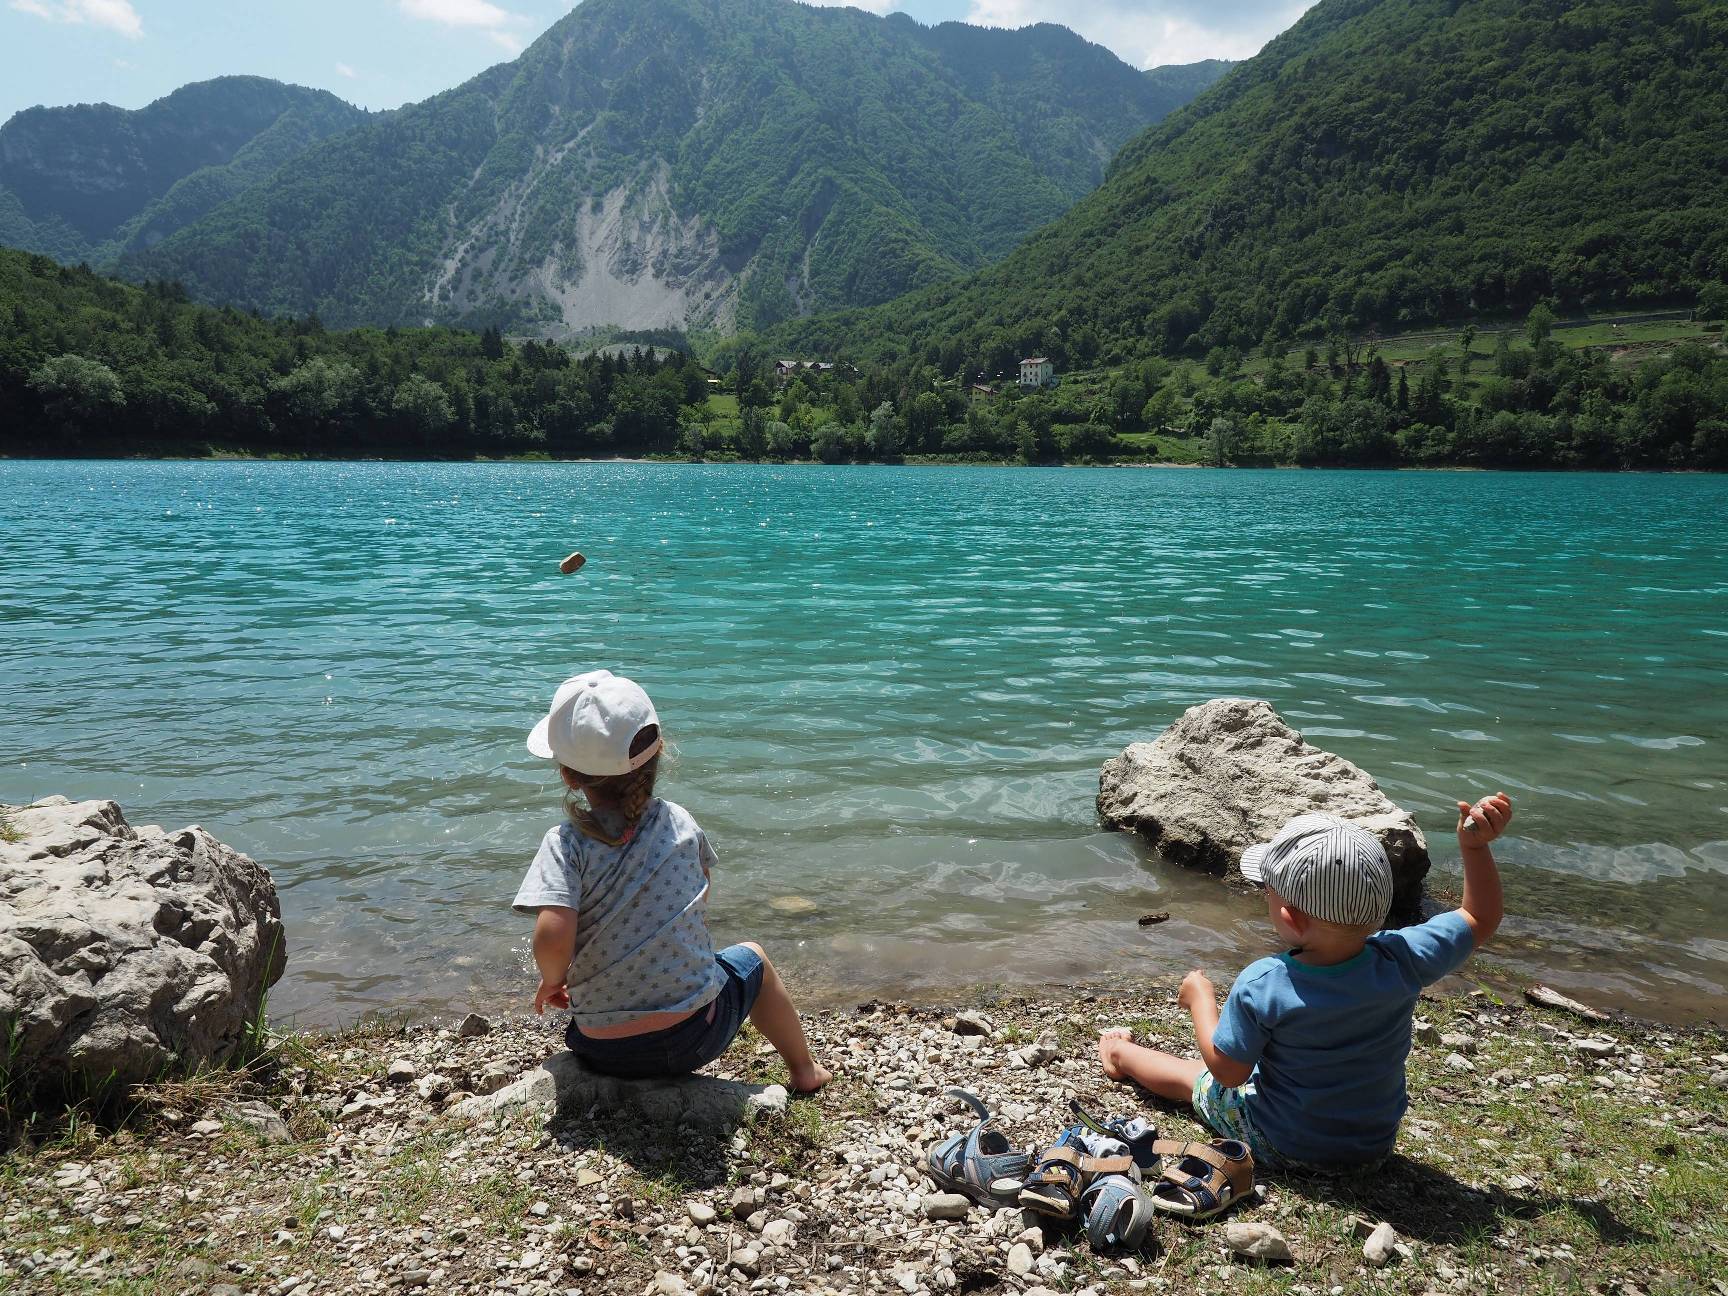 How to spend a quiet family day in Garda Trentino? – main image